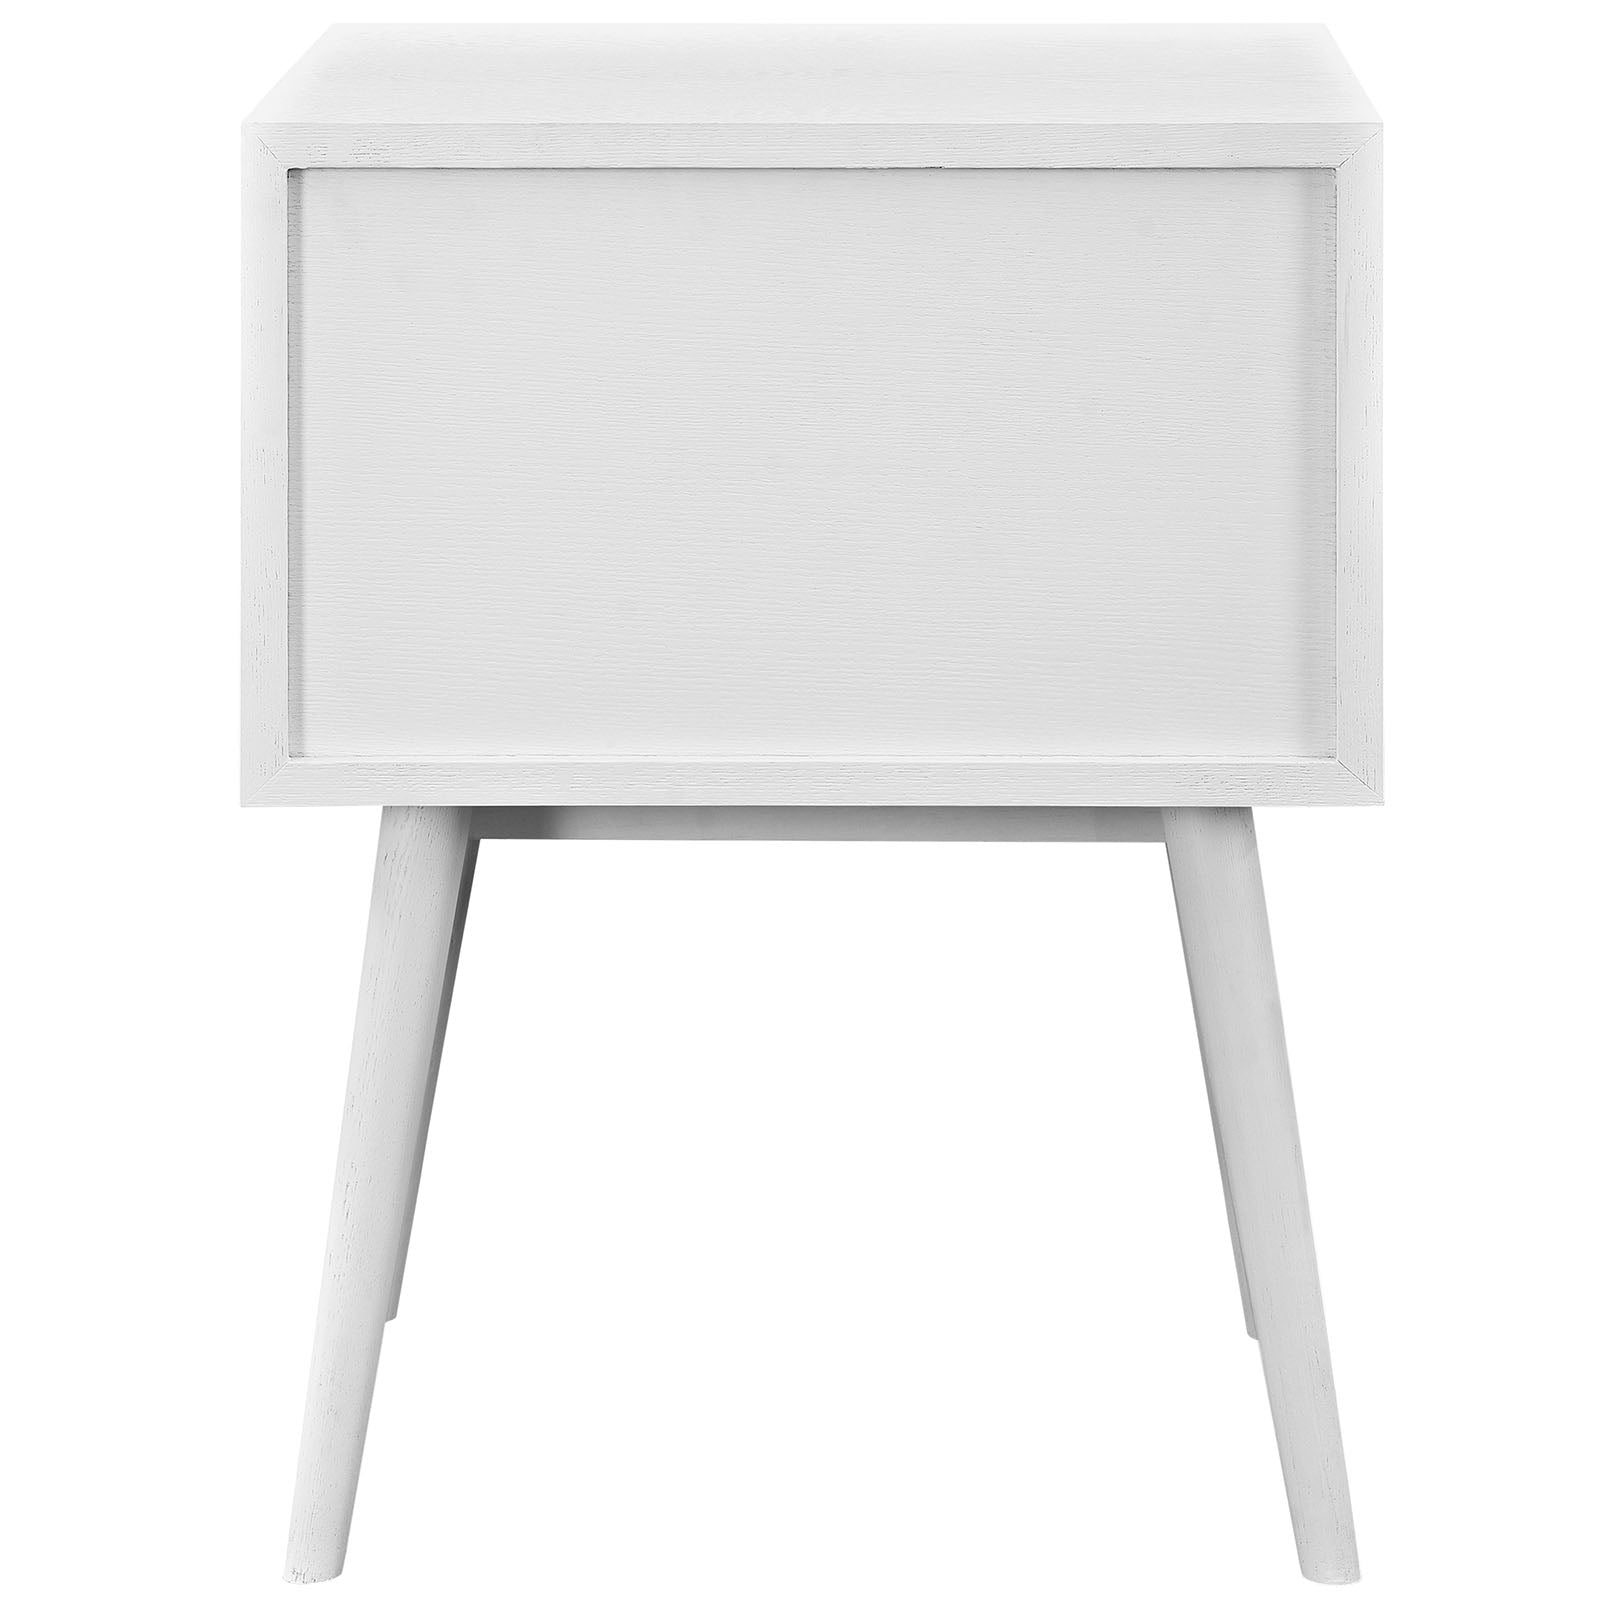 Modway Nightstands & Side Tables - Dispatch Nightstand White